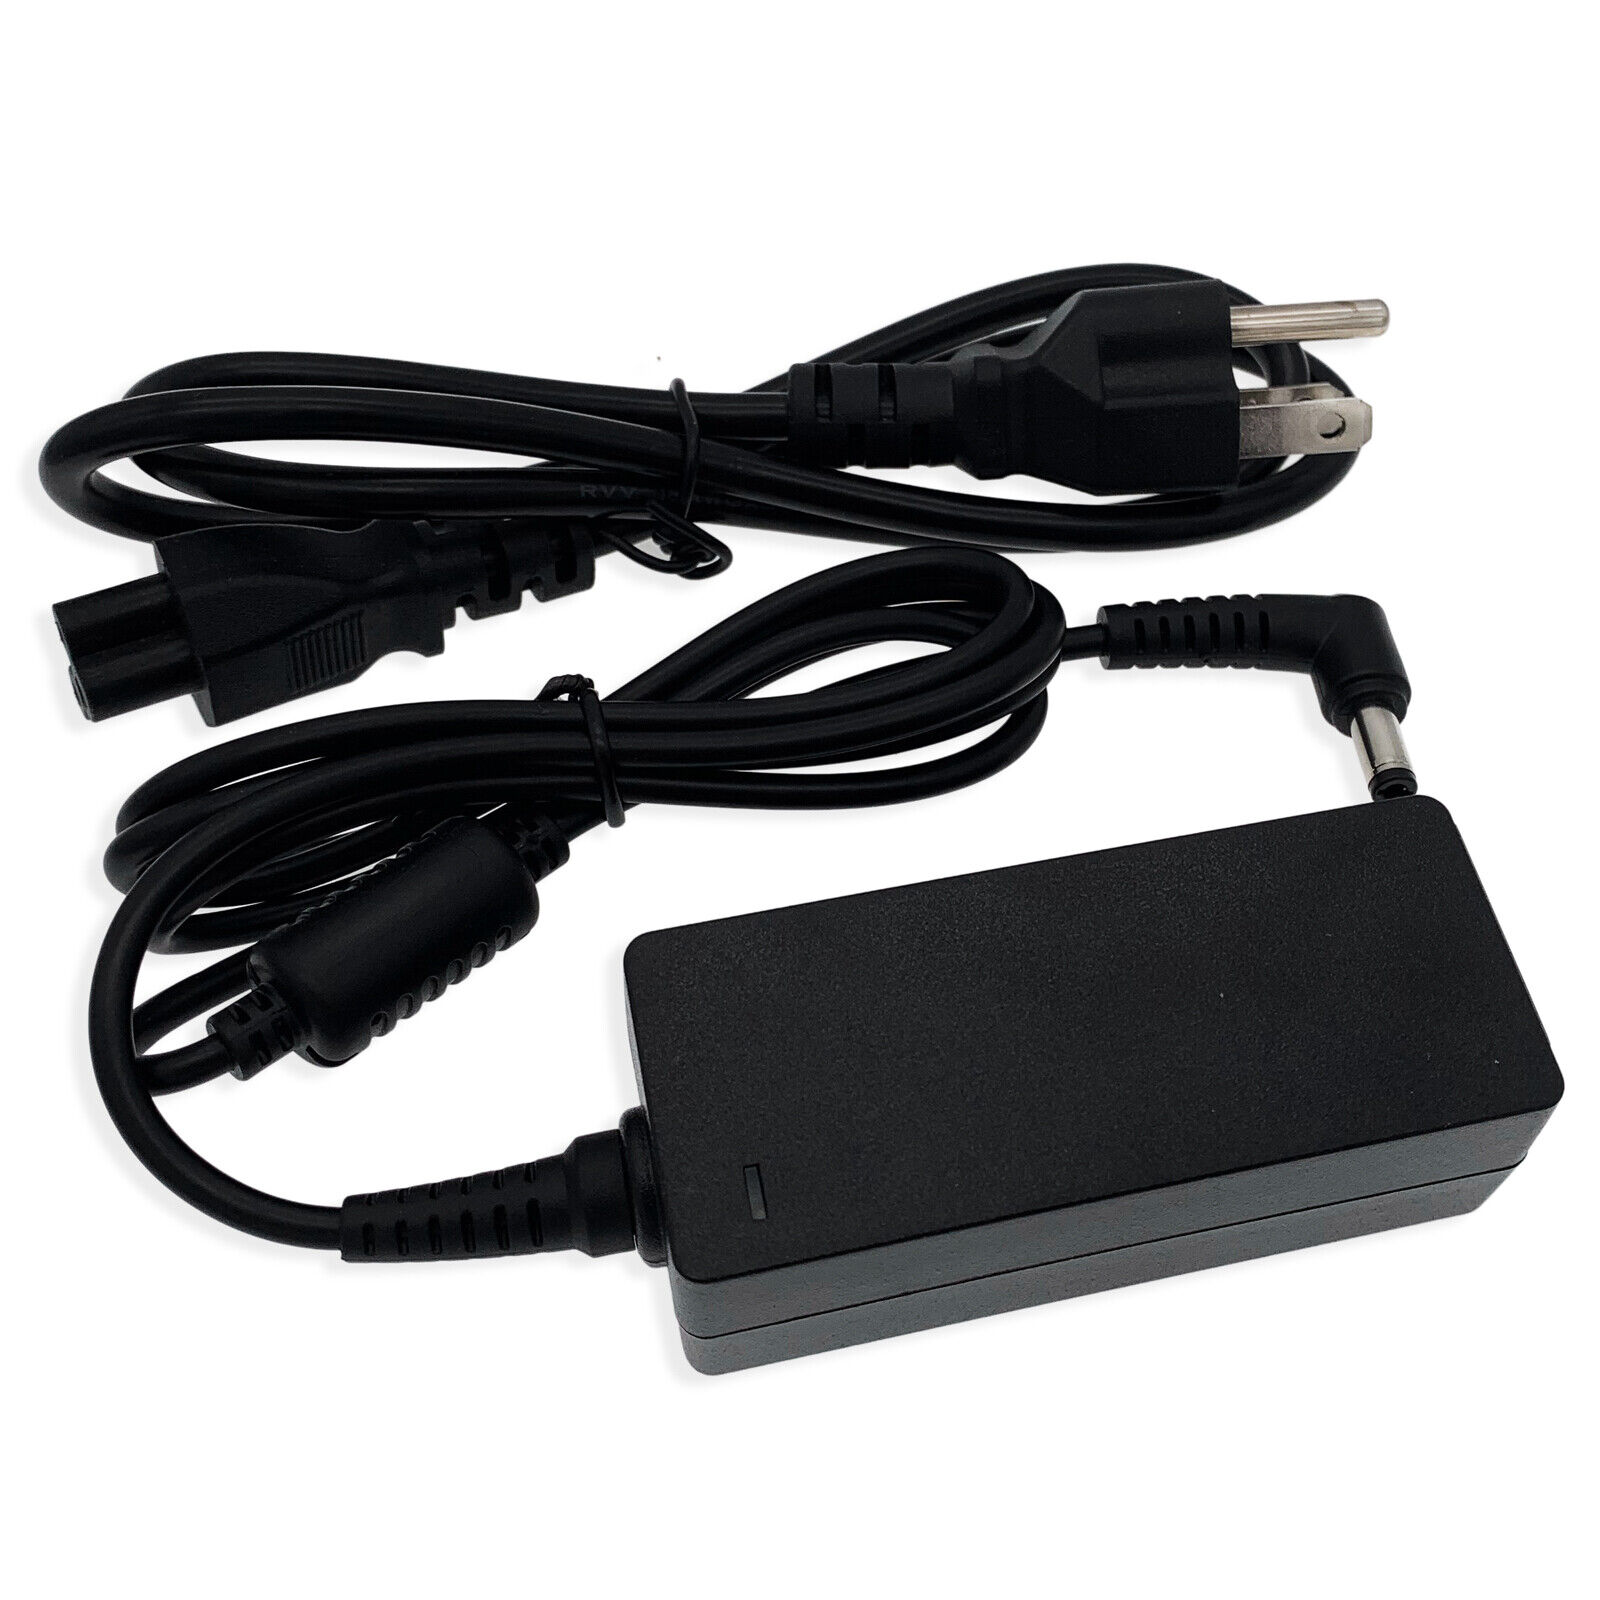 New Original OEM 12V 4.16A 50W AC Adapter&Cord for ELO ET1723L LCD Touch Monitor Compatible Brand For ELO Brand Delta/E